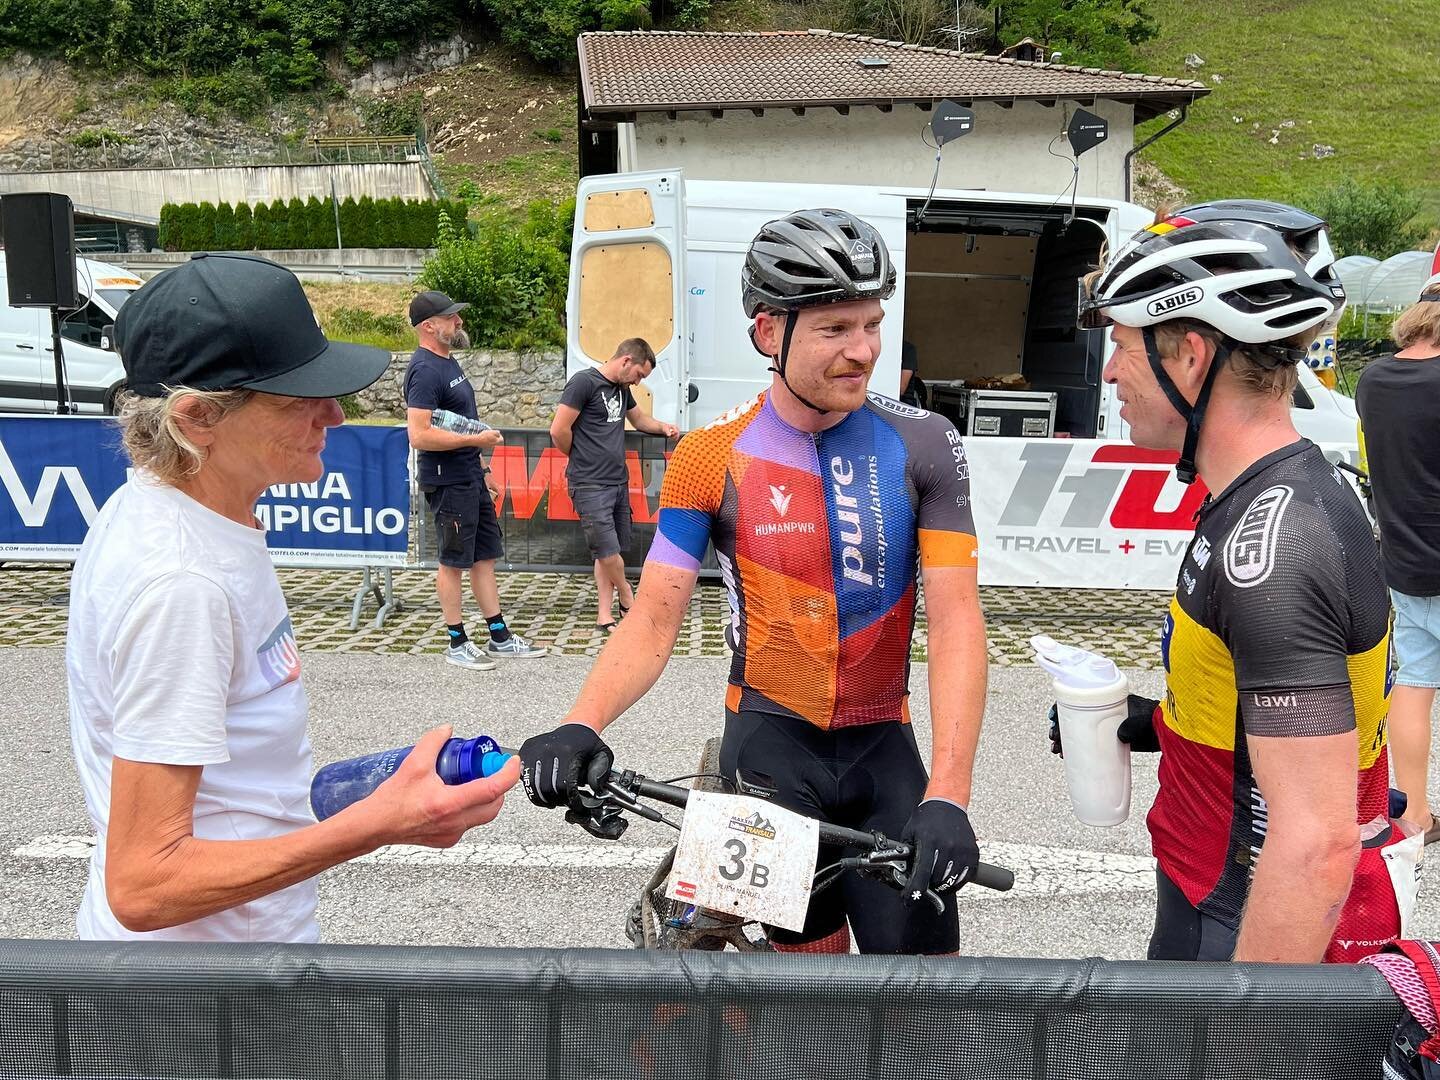 A second spot today for us in the 5th stage (71km &amp; 2550hm) of the @biketransalp . Two stages are remaining before we finish in Riva! We keep on trying.

@humanpwrcycling 

#humanpwrcycling #biketransalp #mtbrace #ucirace #mtbstagerace #veganpowe